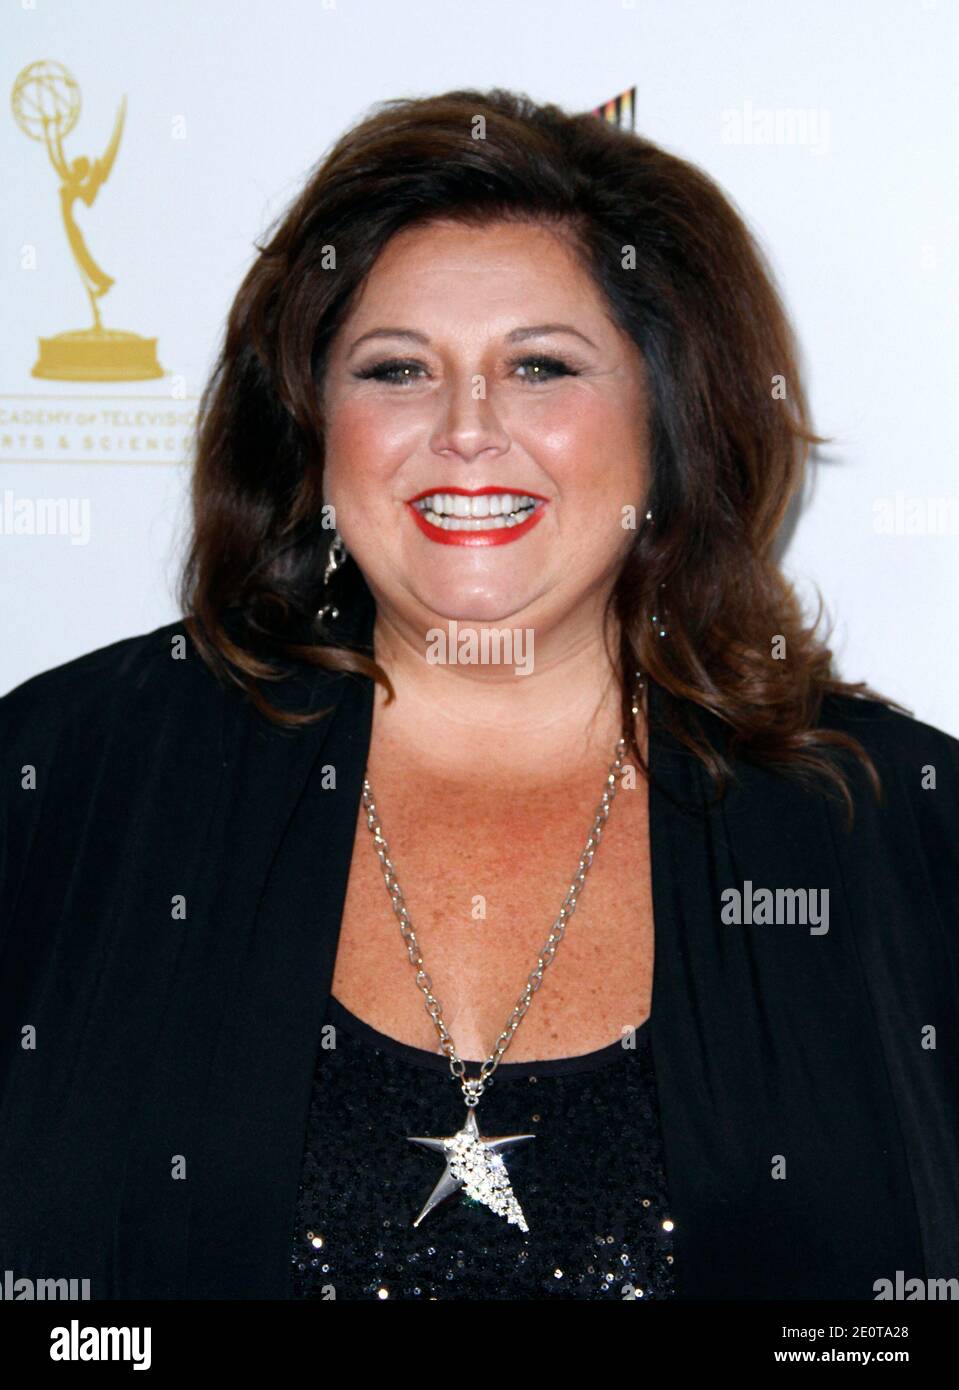 Abby Lee Miller attends the Steel Magnolias Premiere at the Paris Theater in New York City, NY, USA, on October 3, 2012. Photo by Donna Ward/ABACAPRESS.COM Stock Photo